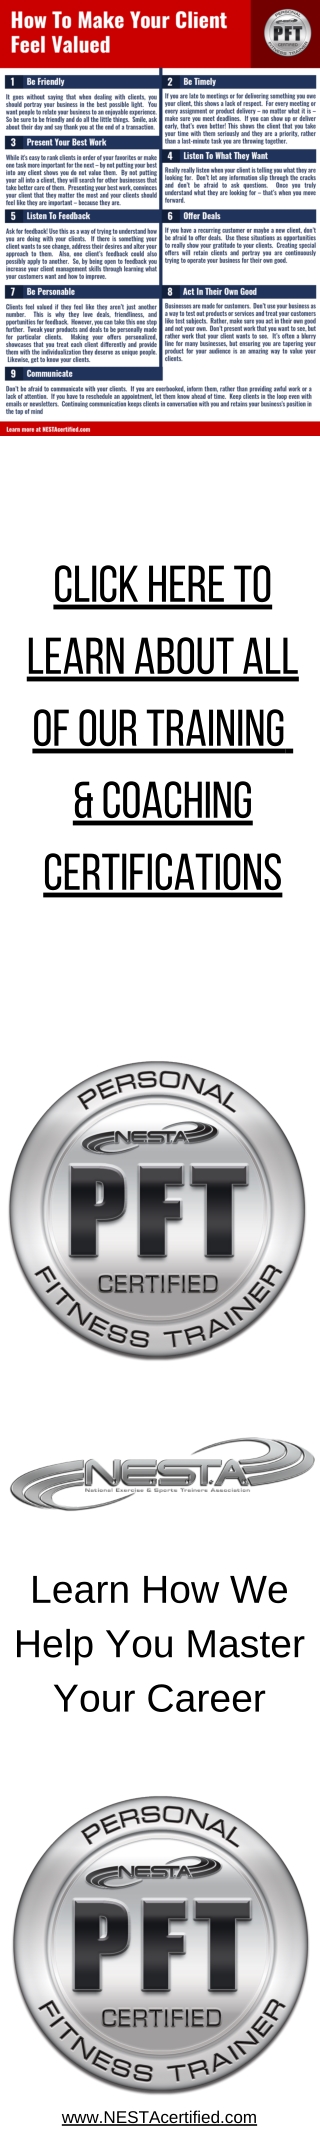 Personal Trainer Best Business and Marketing Strategies